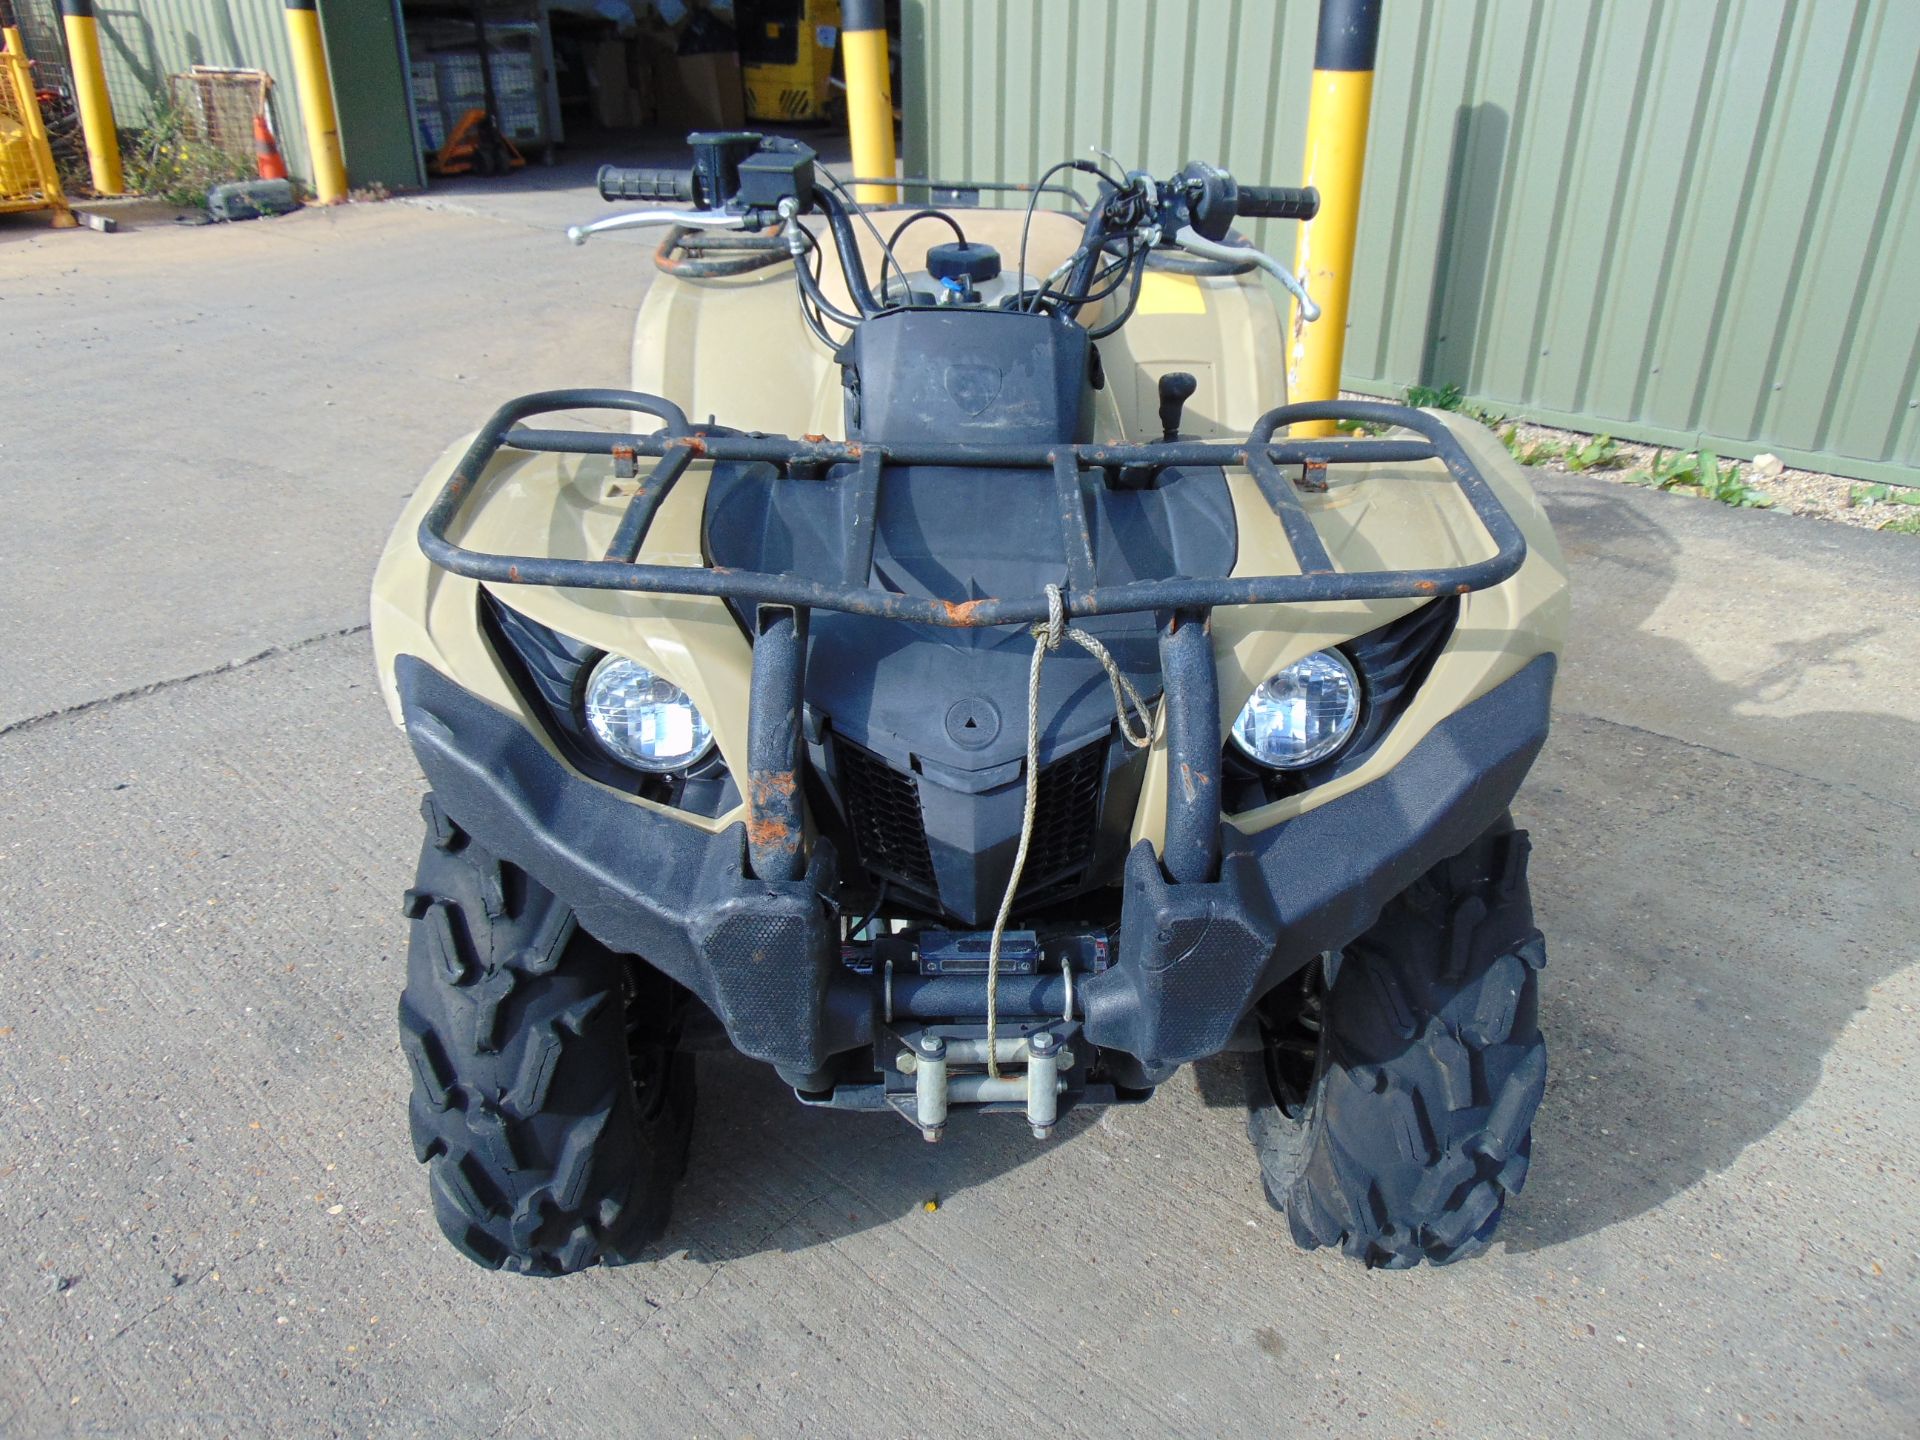 Military Specification Yamaha Grizzly 450 4 x 4 ATV Quad Bike - Image 2 of 14